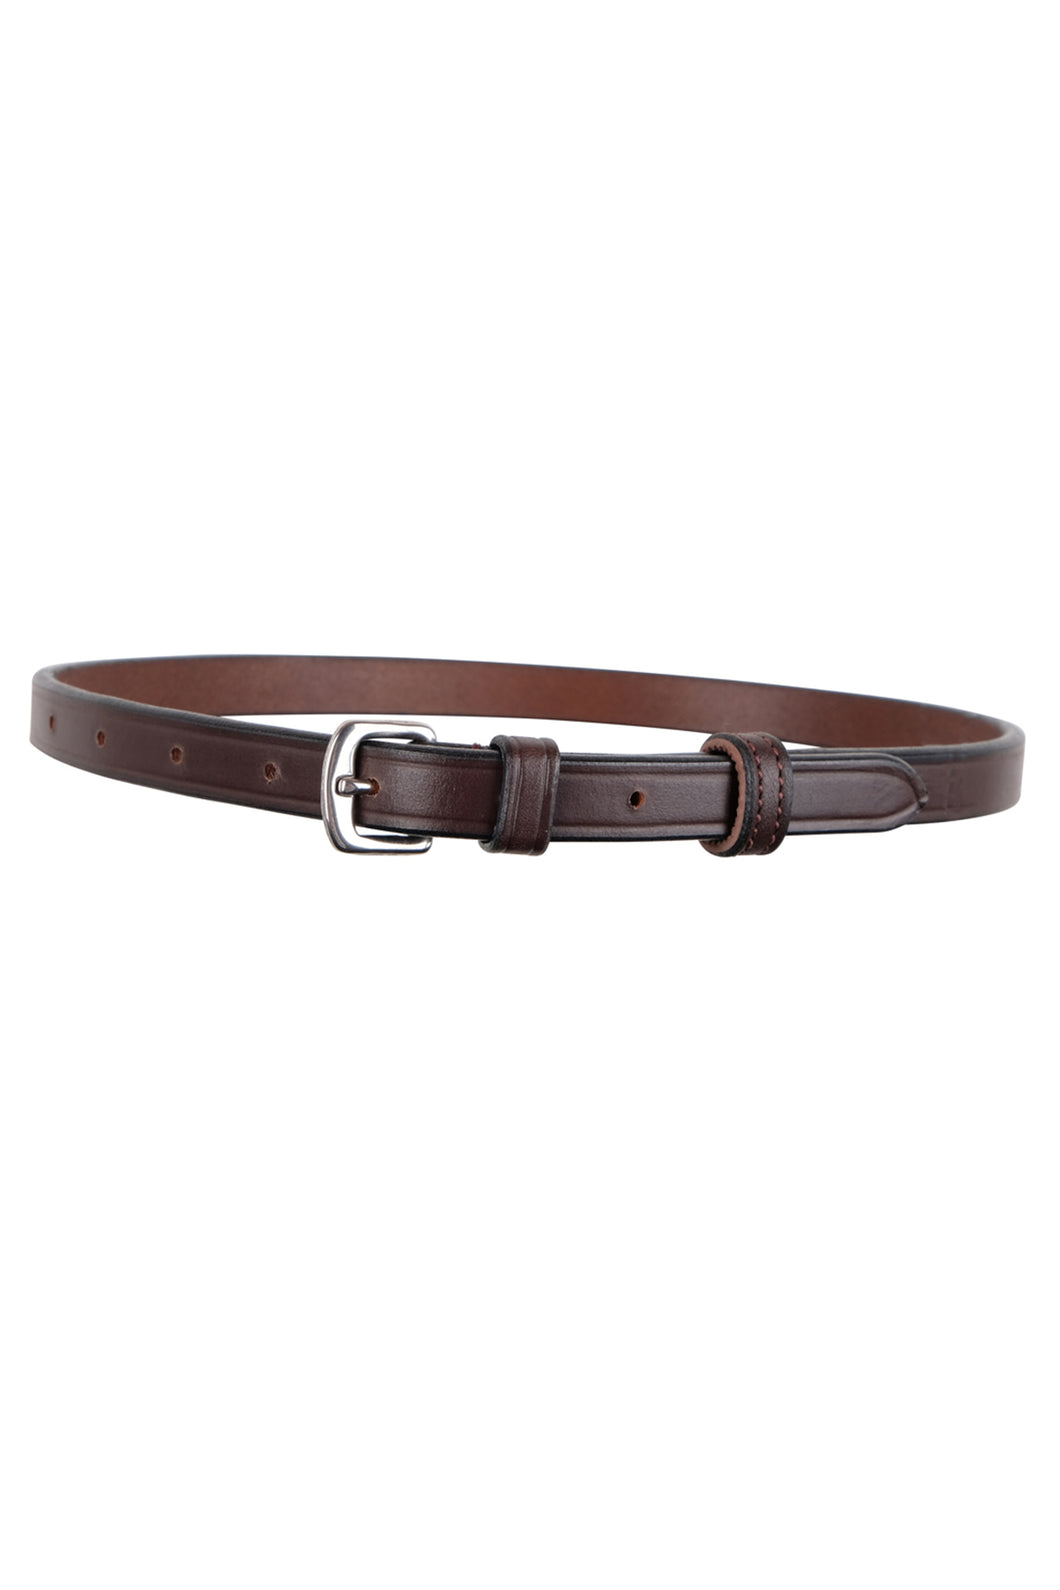 Flash Strap - Brown Leather